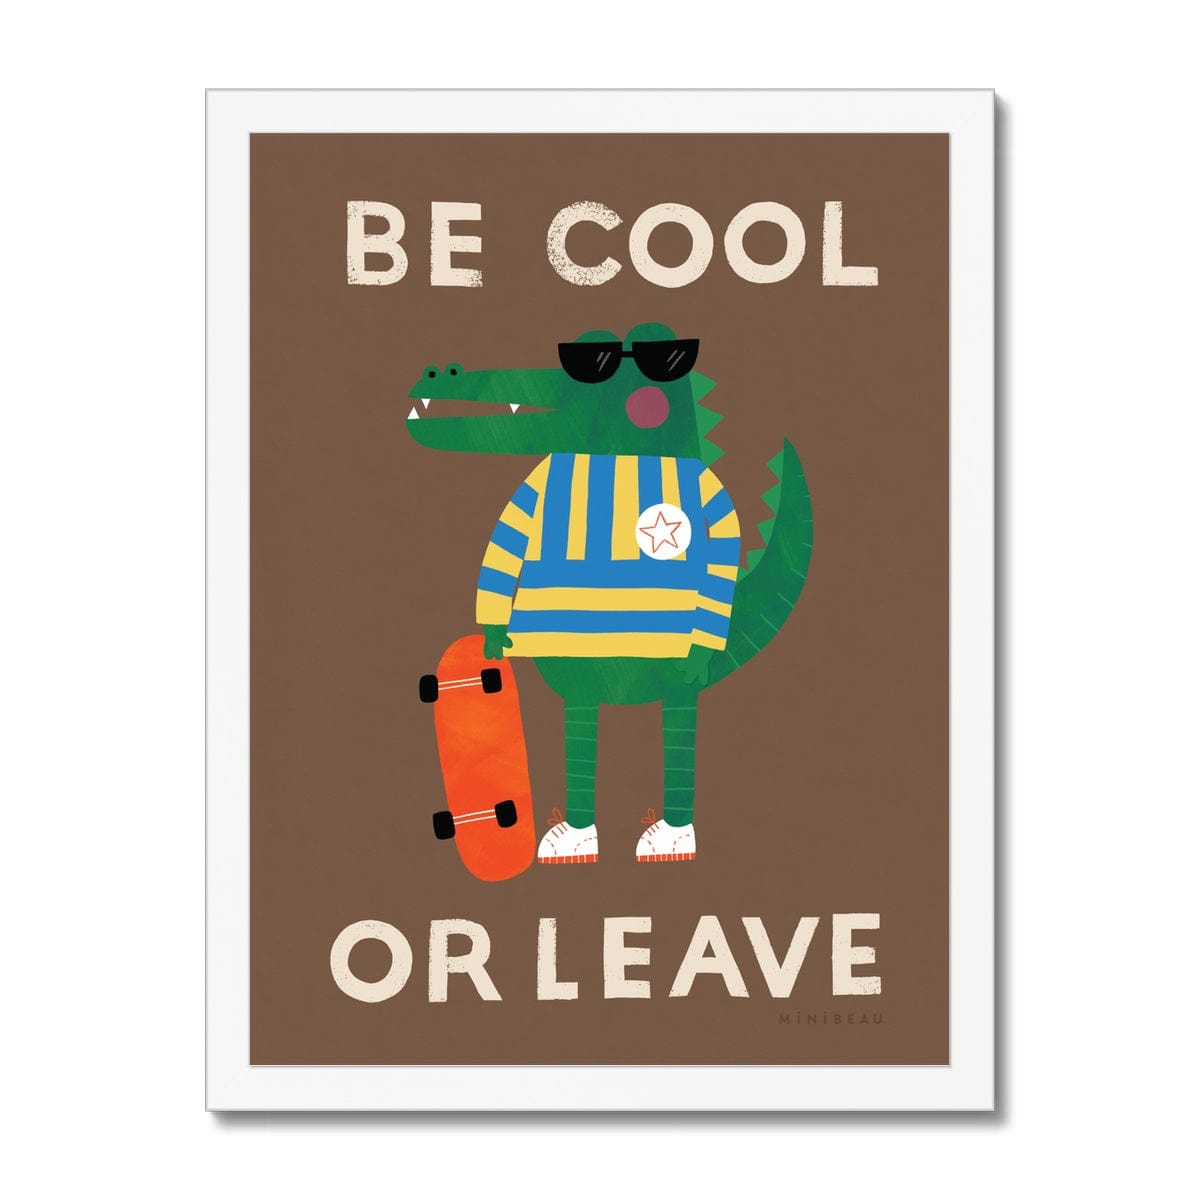 Art print in a white frame. Our be cool or leave art print show a crocodile in a yellow and blue striped jumper and sunglasses, standing on his hind legs holding a skateboard, with the words be cool or leave in an off-white on a brown background.